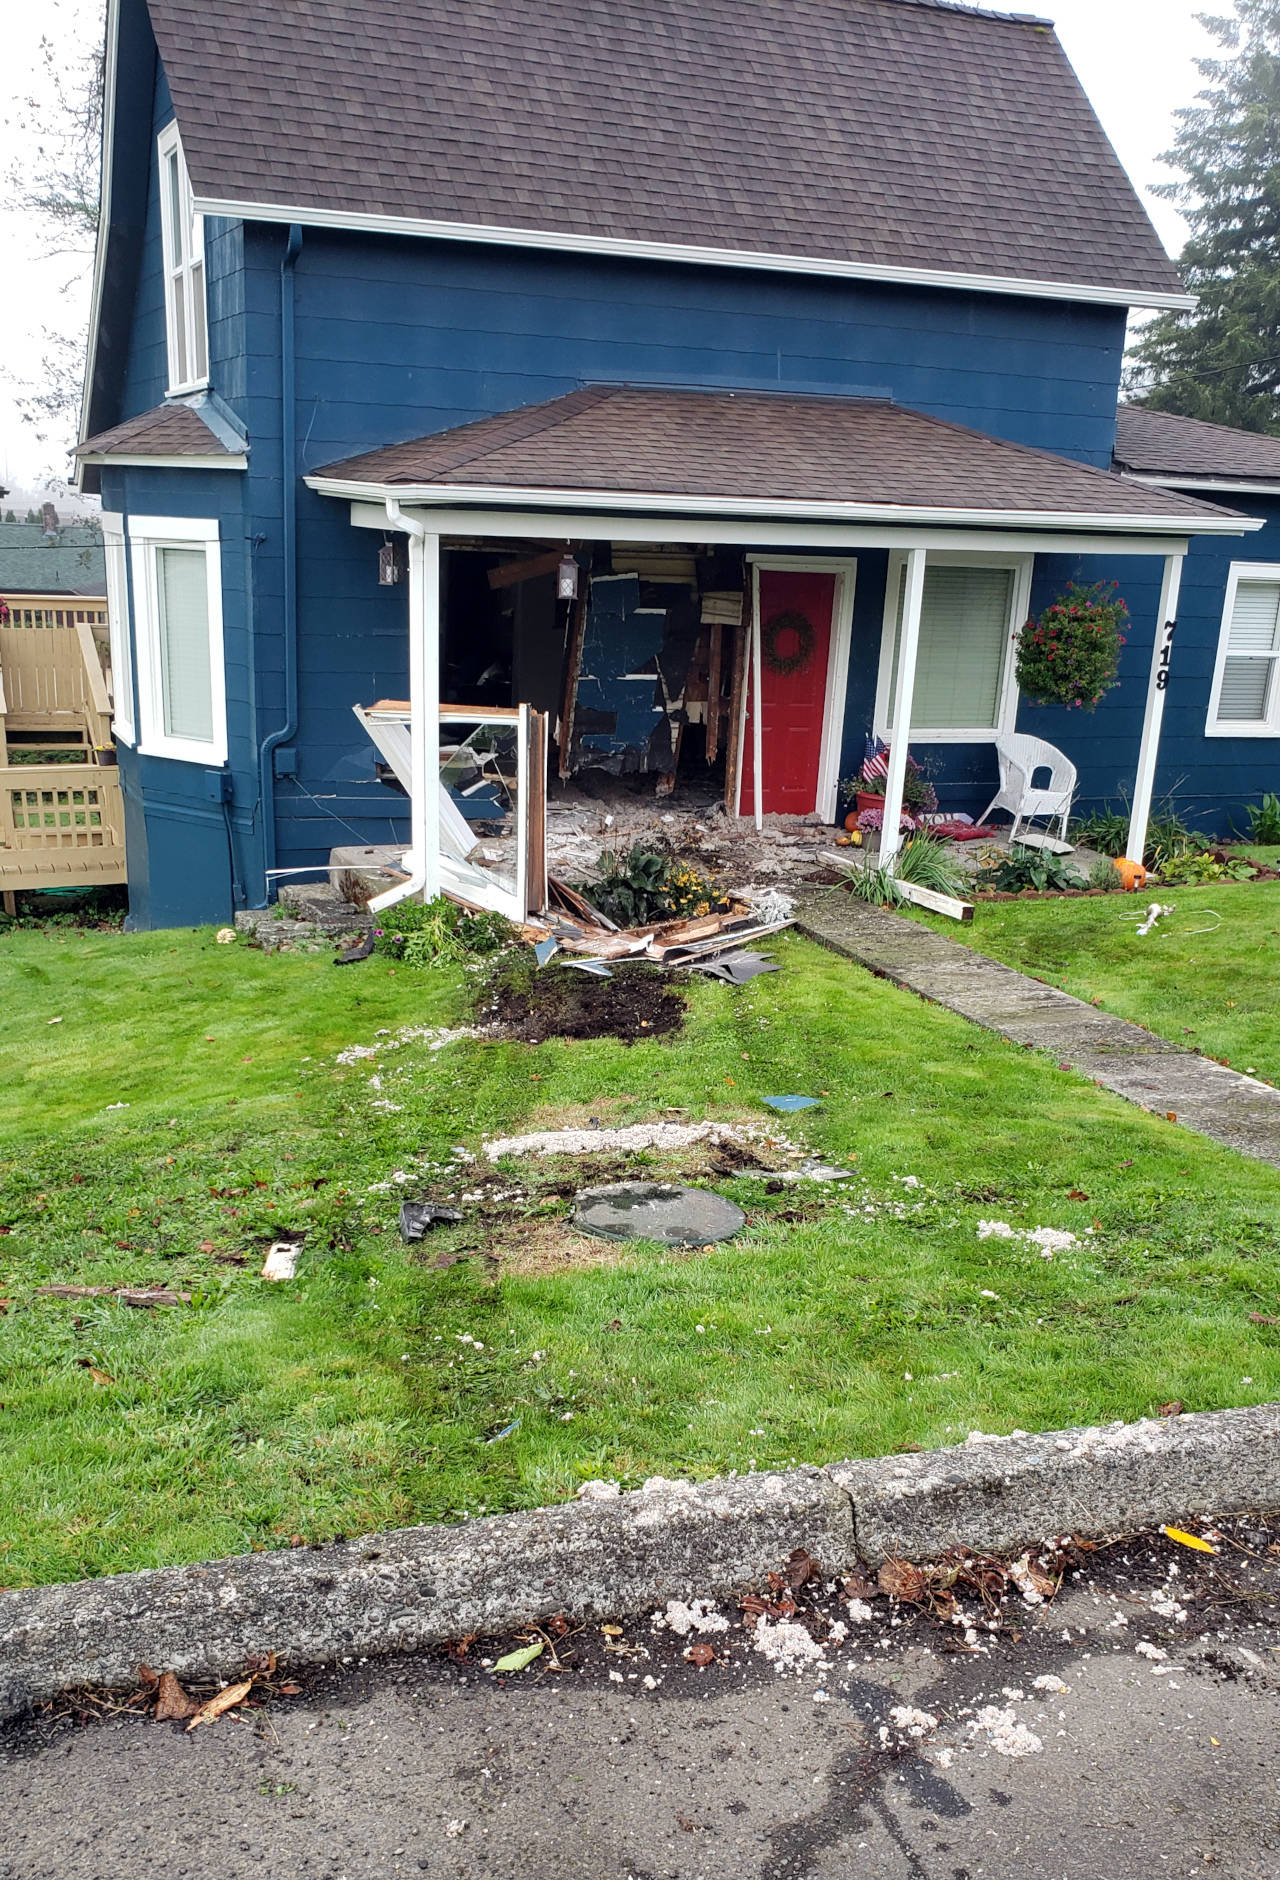 Tire tracks in the grass of a home on Pioneer Avenue show the trajectory of a passenger vehicle that veered off the road and rammed into the front of a house on Thursday morning in Montesano. (Ryan Sparks | The Daily World)